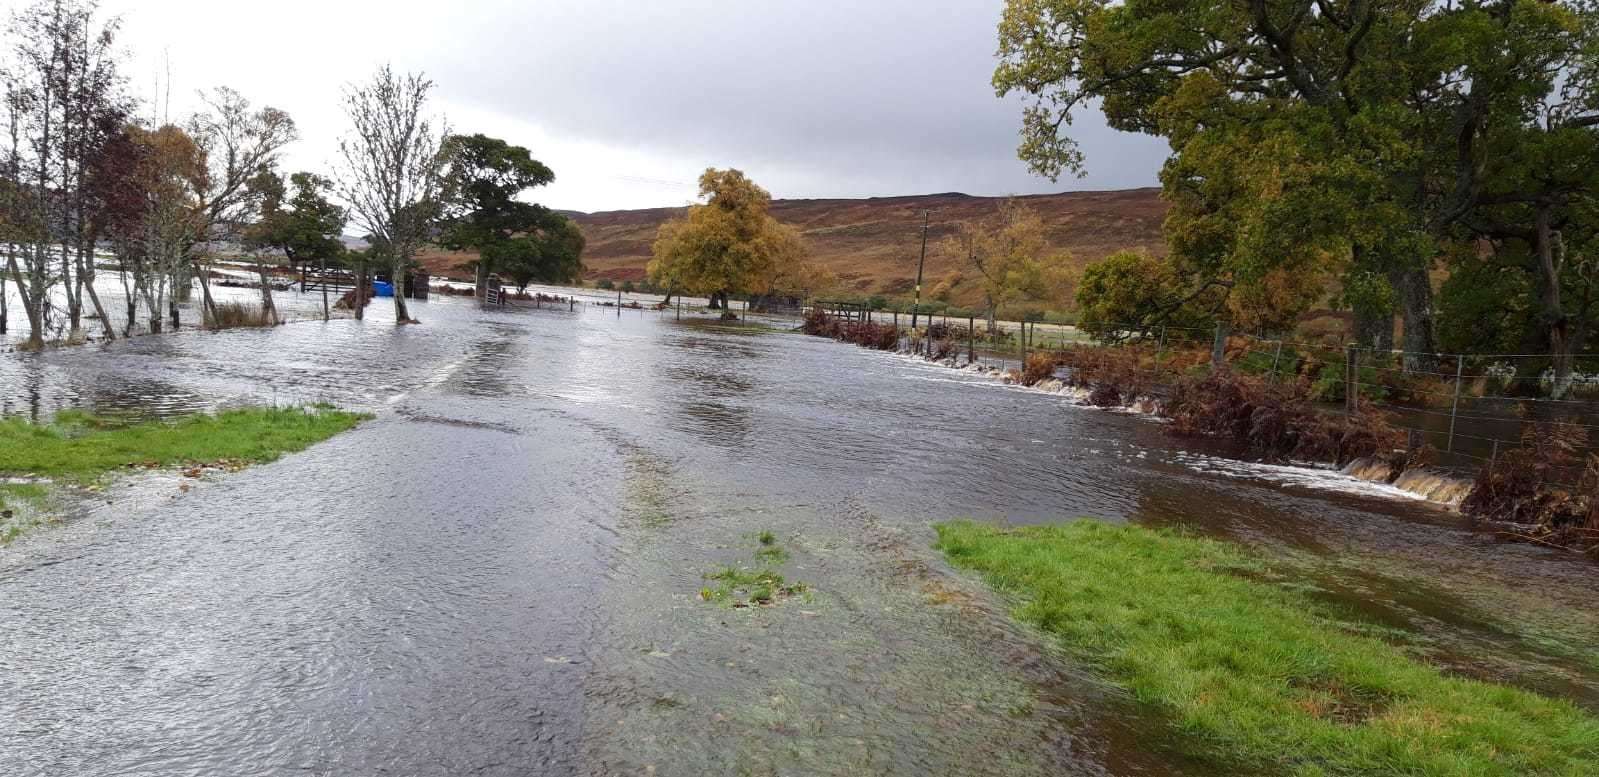 The River Brora burst its banks and covered the road at Balnacoil.